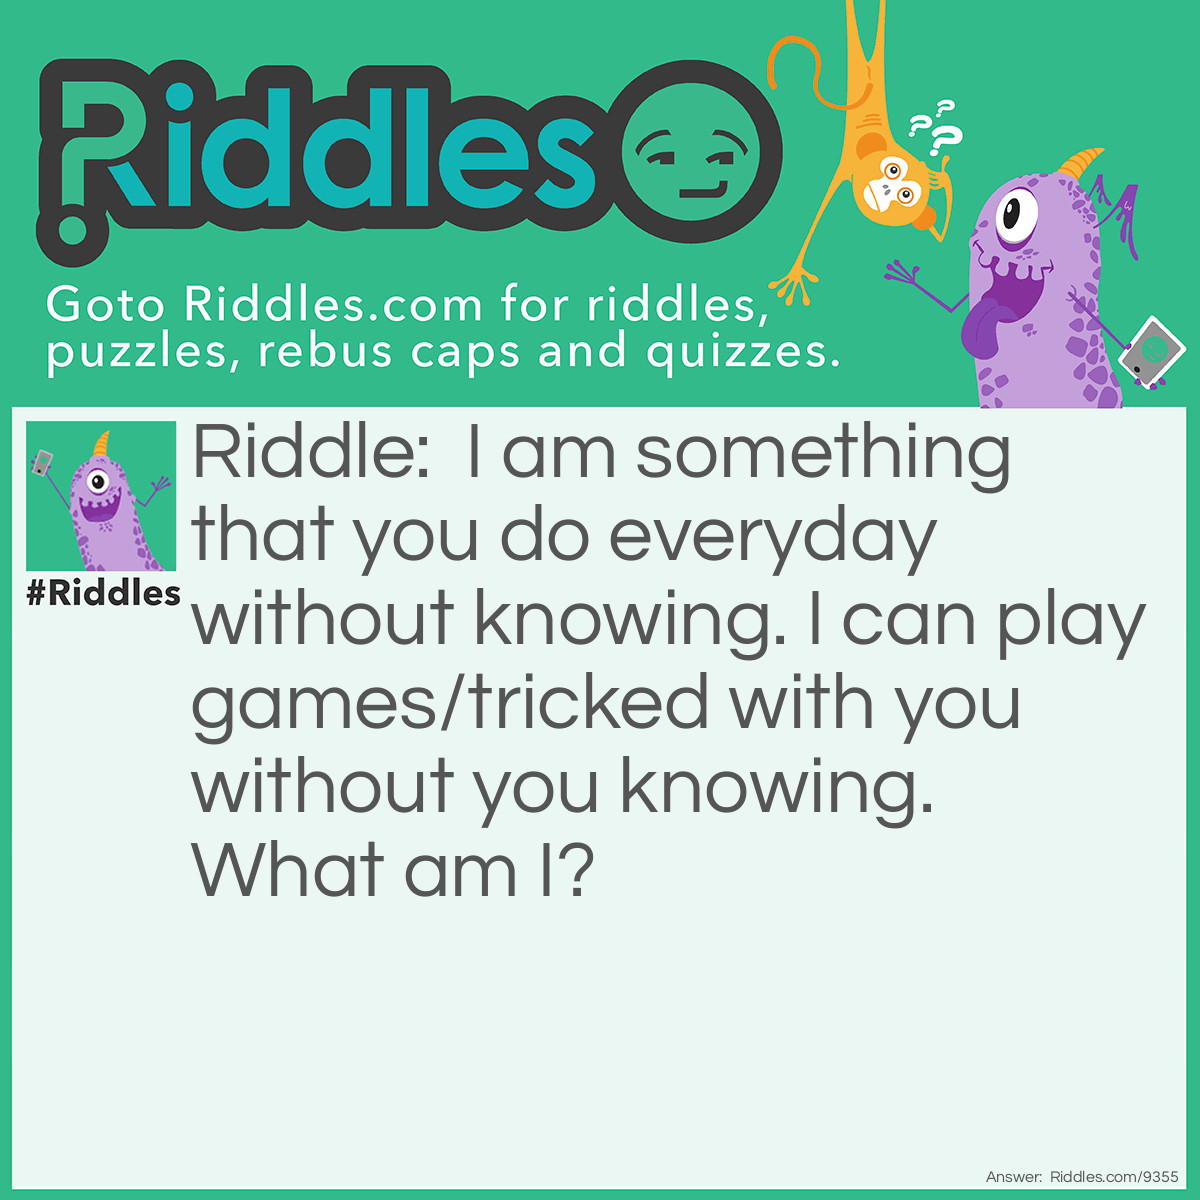 Riddle: I am something that you do everyday without knowing. I can play games/tricked with you without you knowing. What am I? Answer: Eye